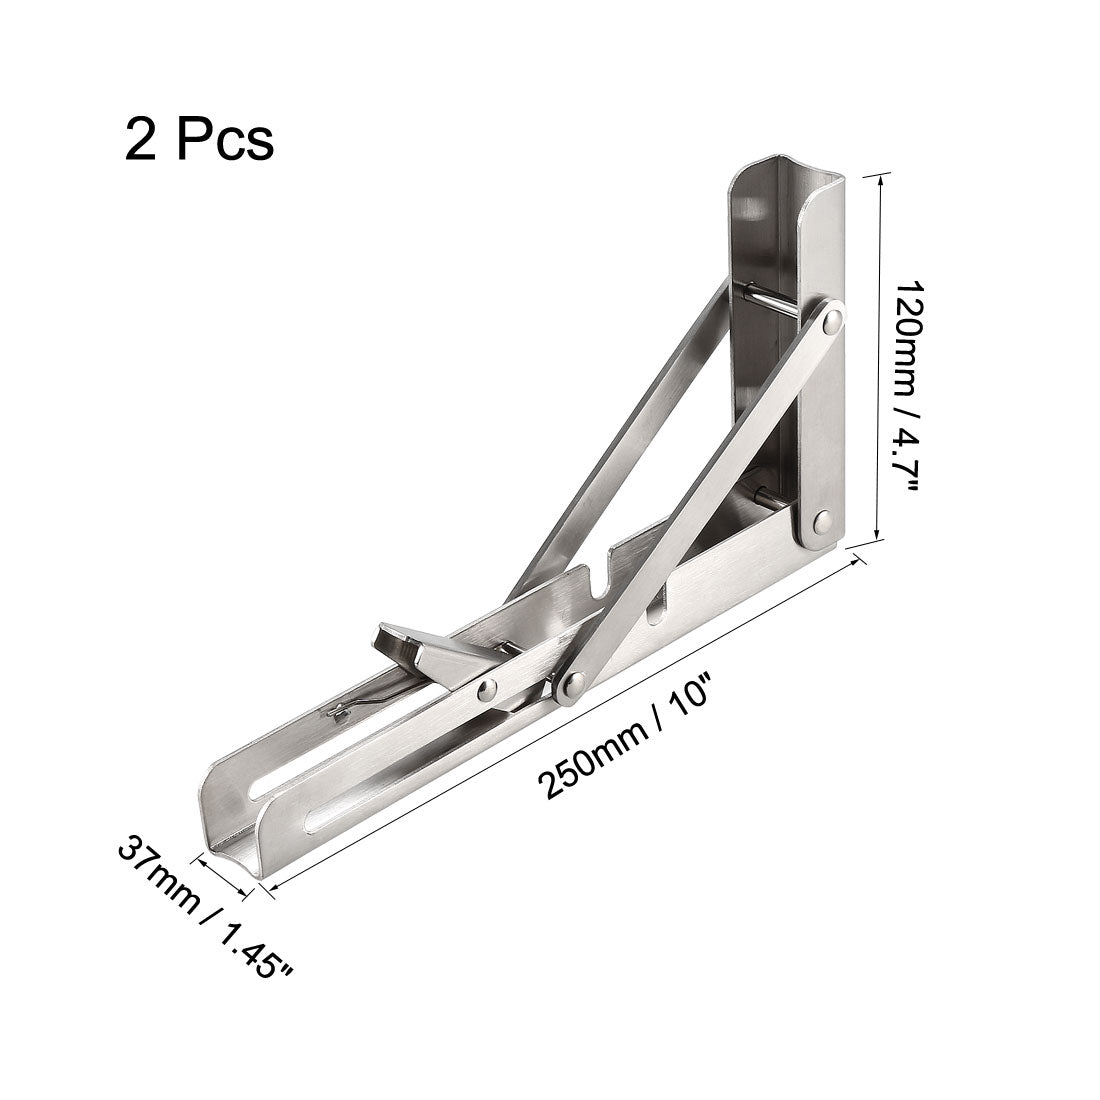 uxcell Uxcell Folding Bracket 10 inch 250mm for Shelf Table Desk Wall Mounted Support Collapsible Long Release Arm Space Saving Stainless Steel 2pcs